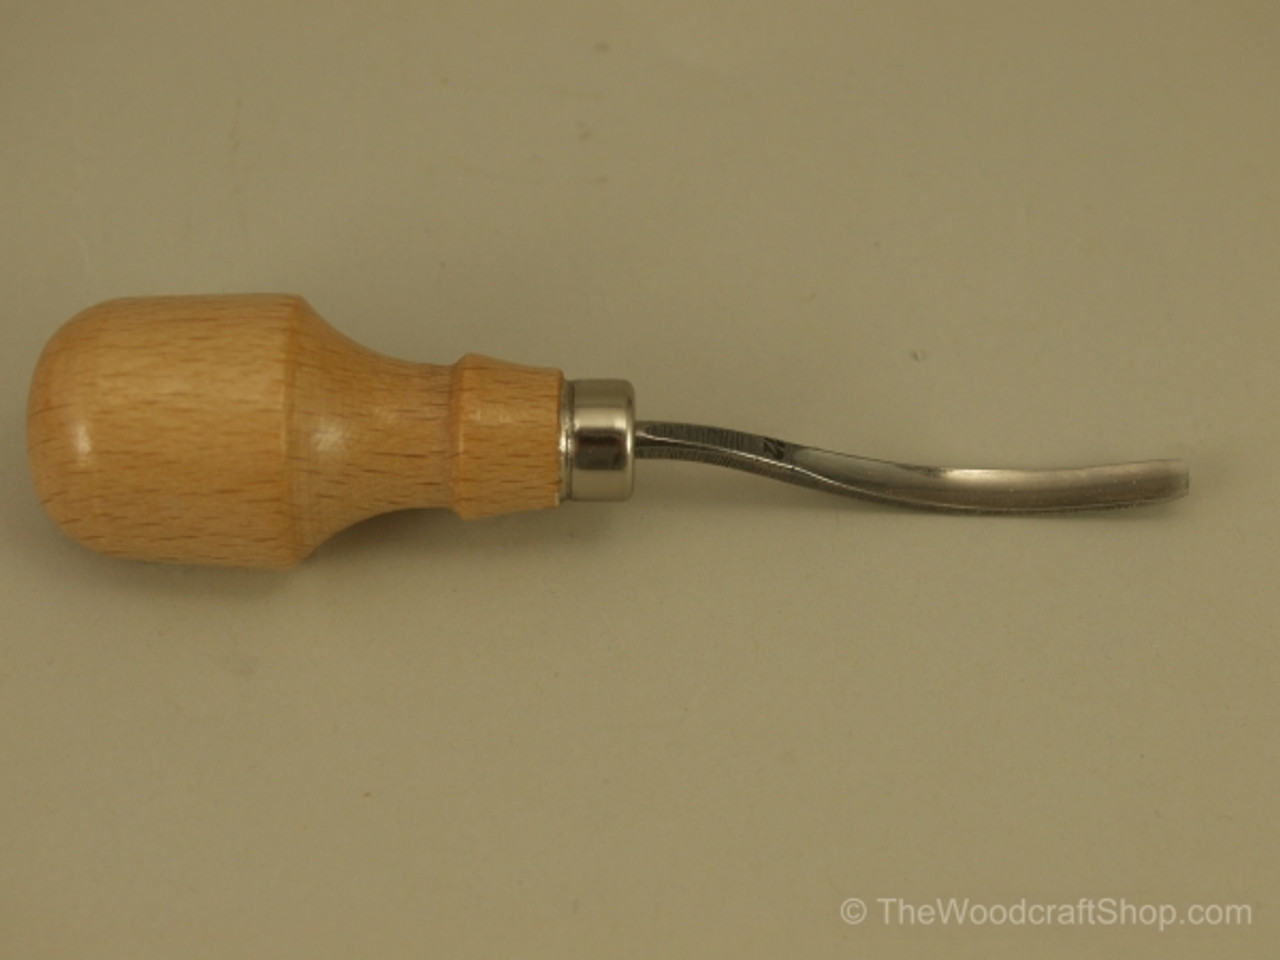 Stubai Palm #1 Long Bent Chisel 5mm showing the Beechwood handle and blade profile.